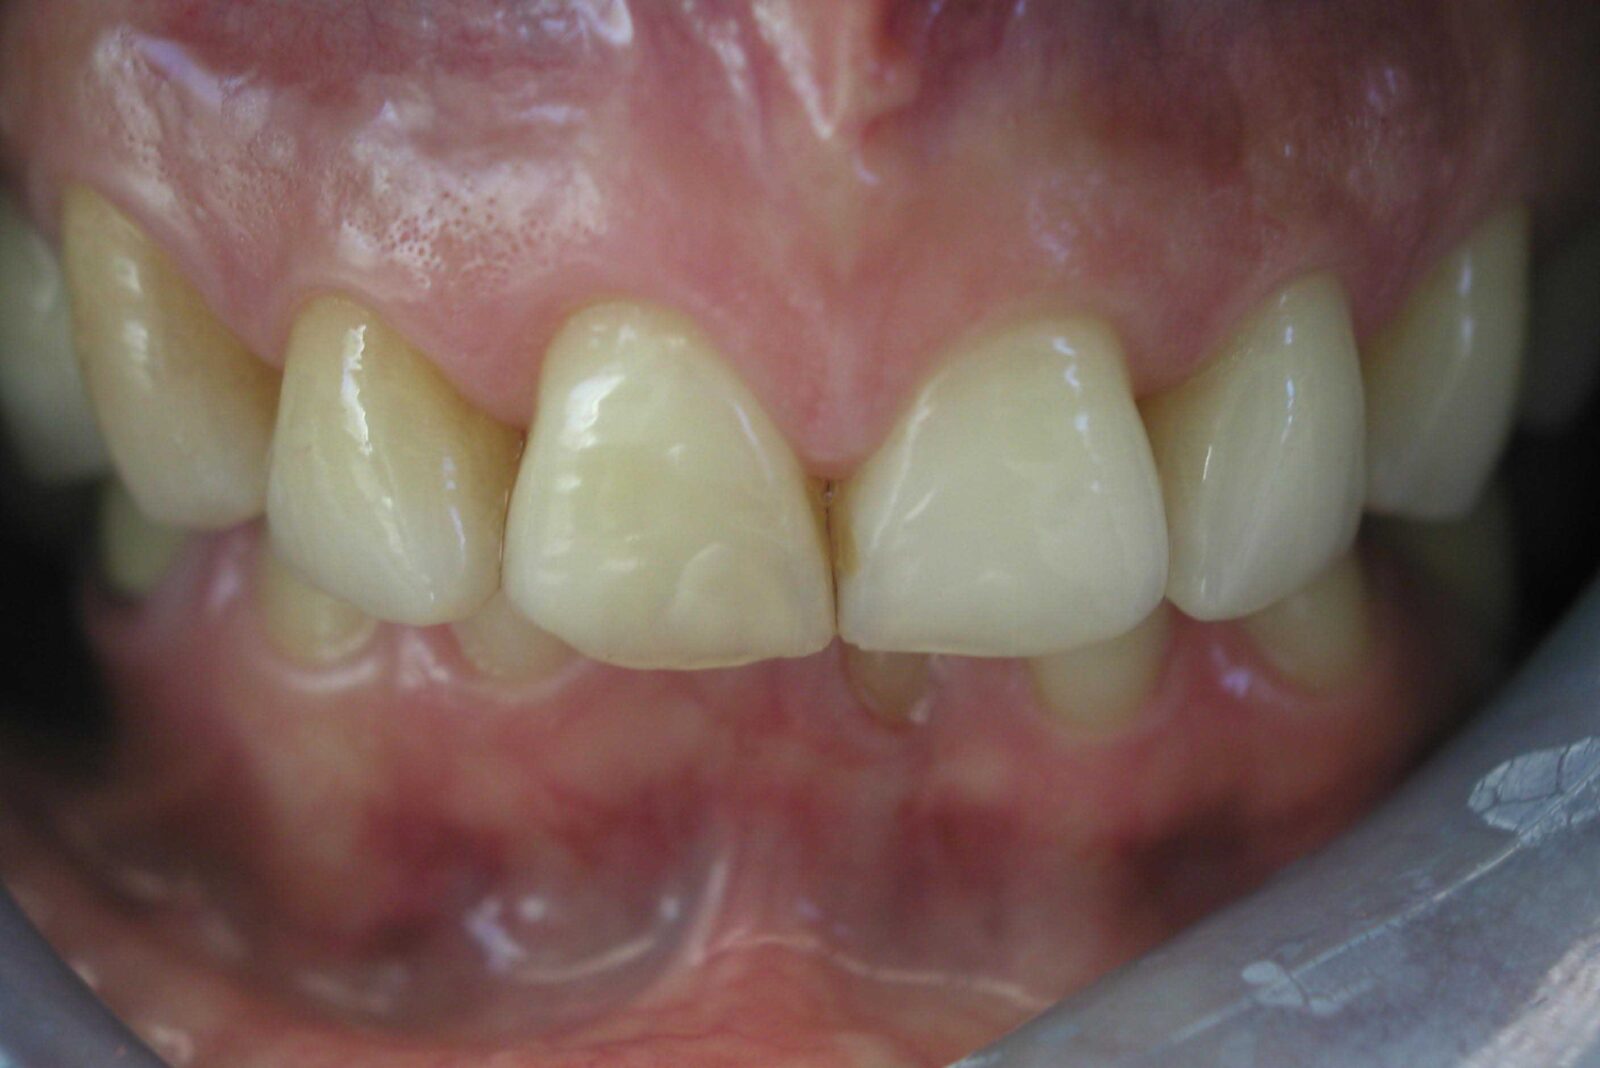 Client's teeth before treatment